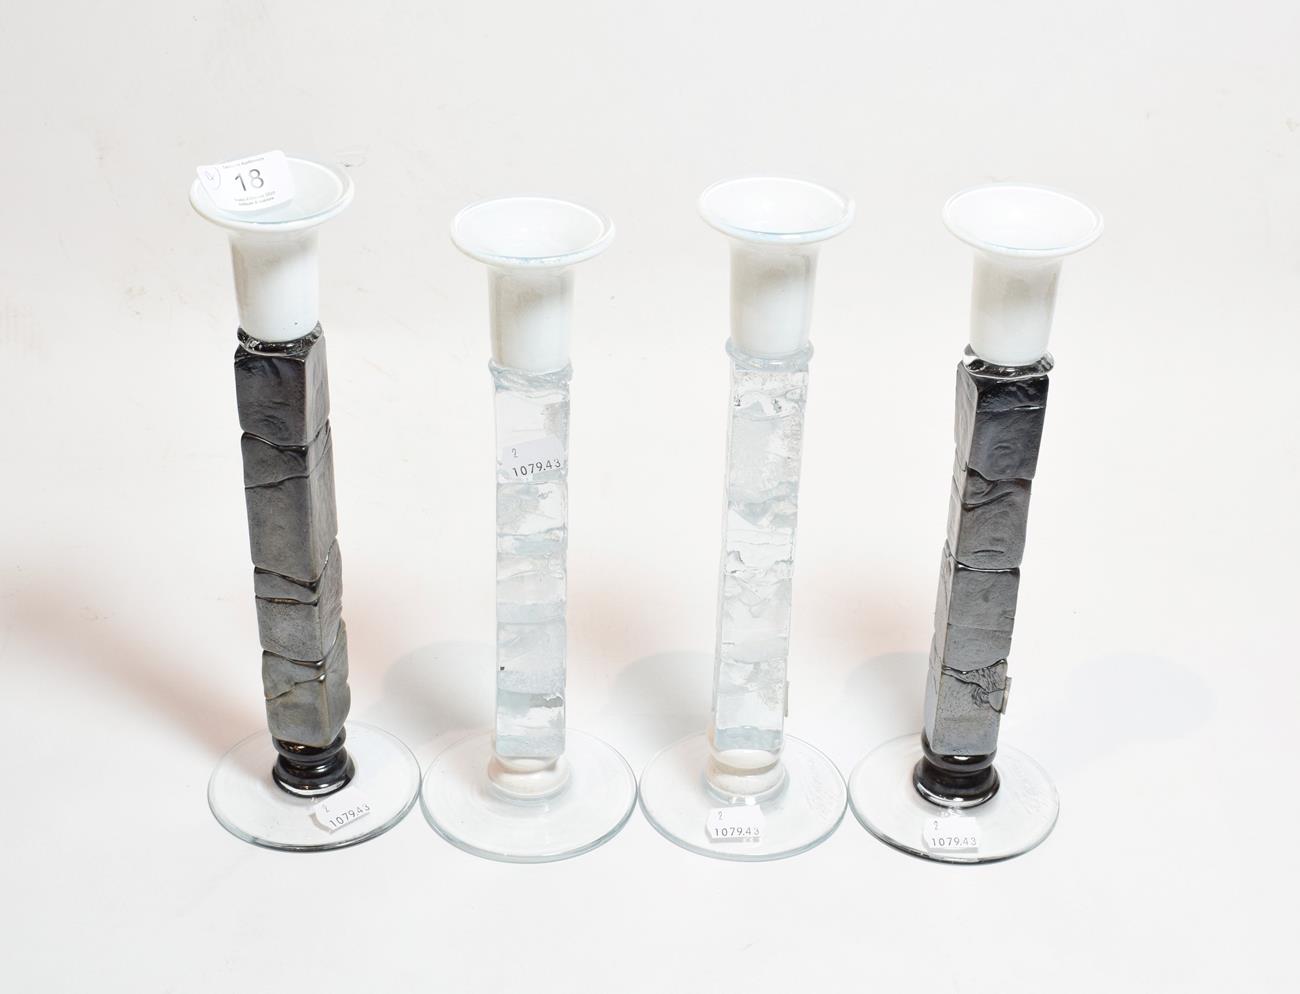 Lot 18 - Two pairs of Mihai Topescu glass candlesticks, signed with labels